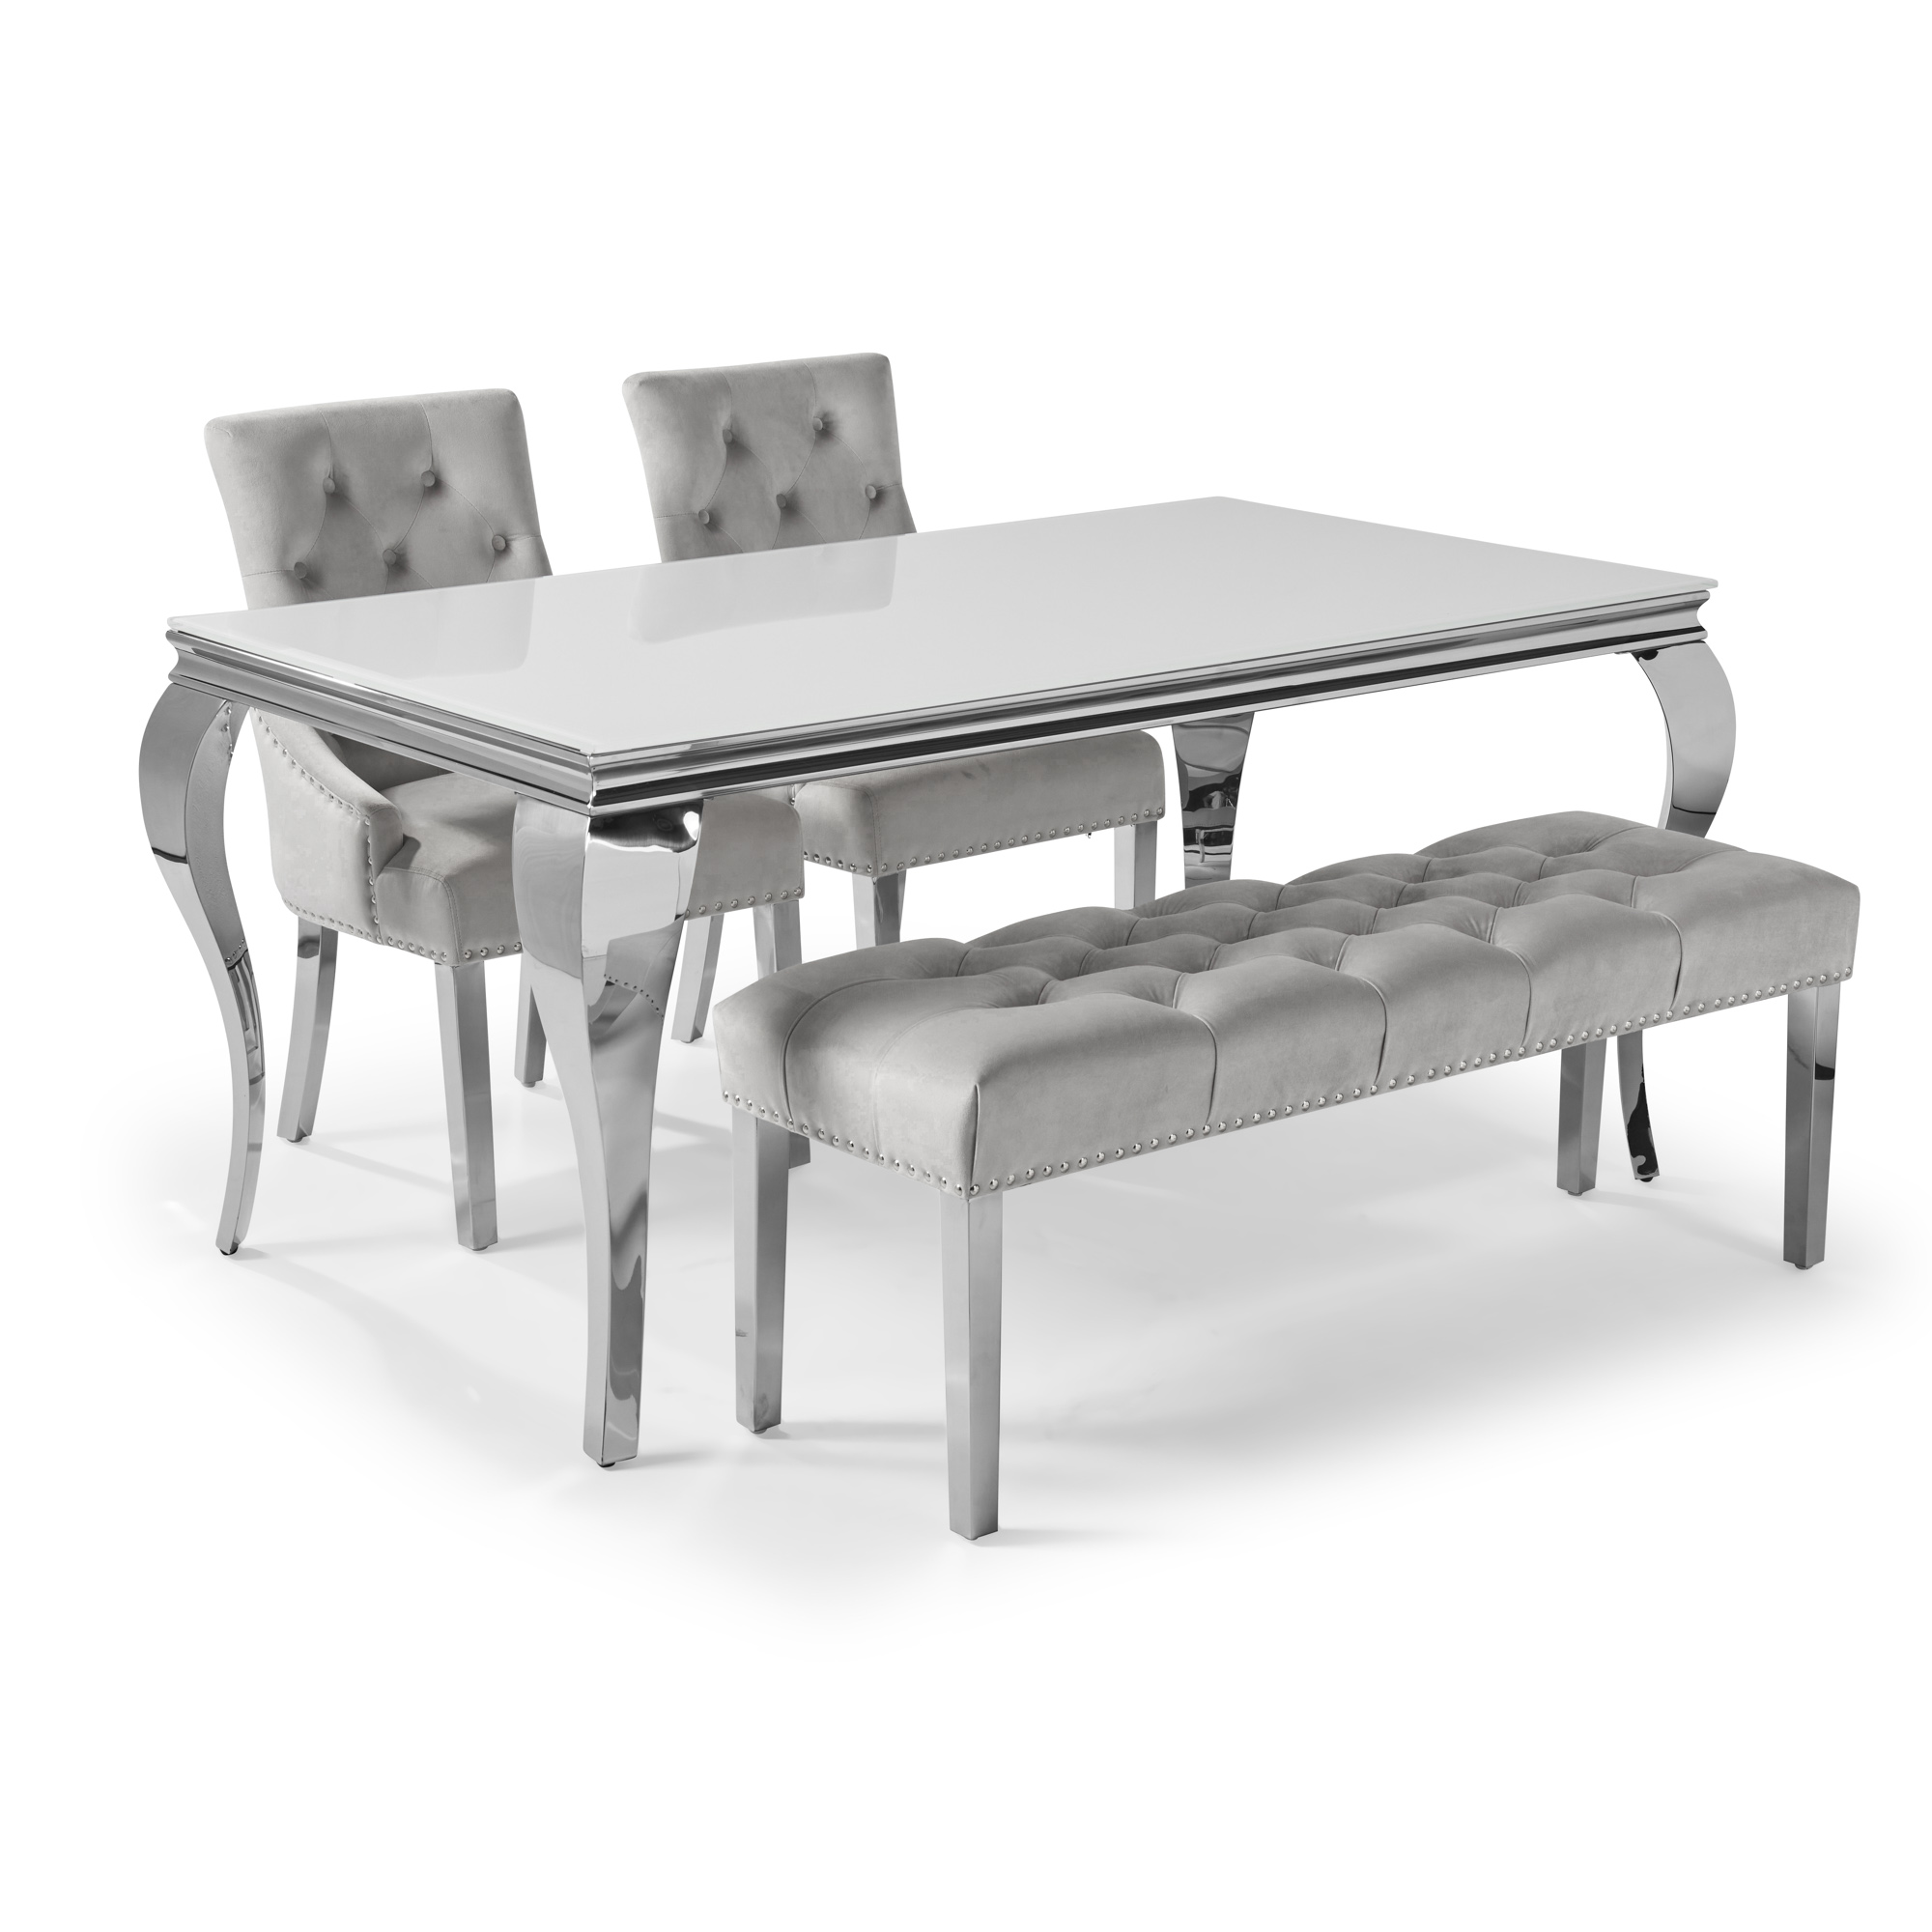 1.6m Louis Polished Steel Dining White Glass Table Set with 2 Chelsea Dining Chairs and Bench in Light Grey